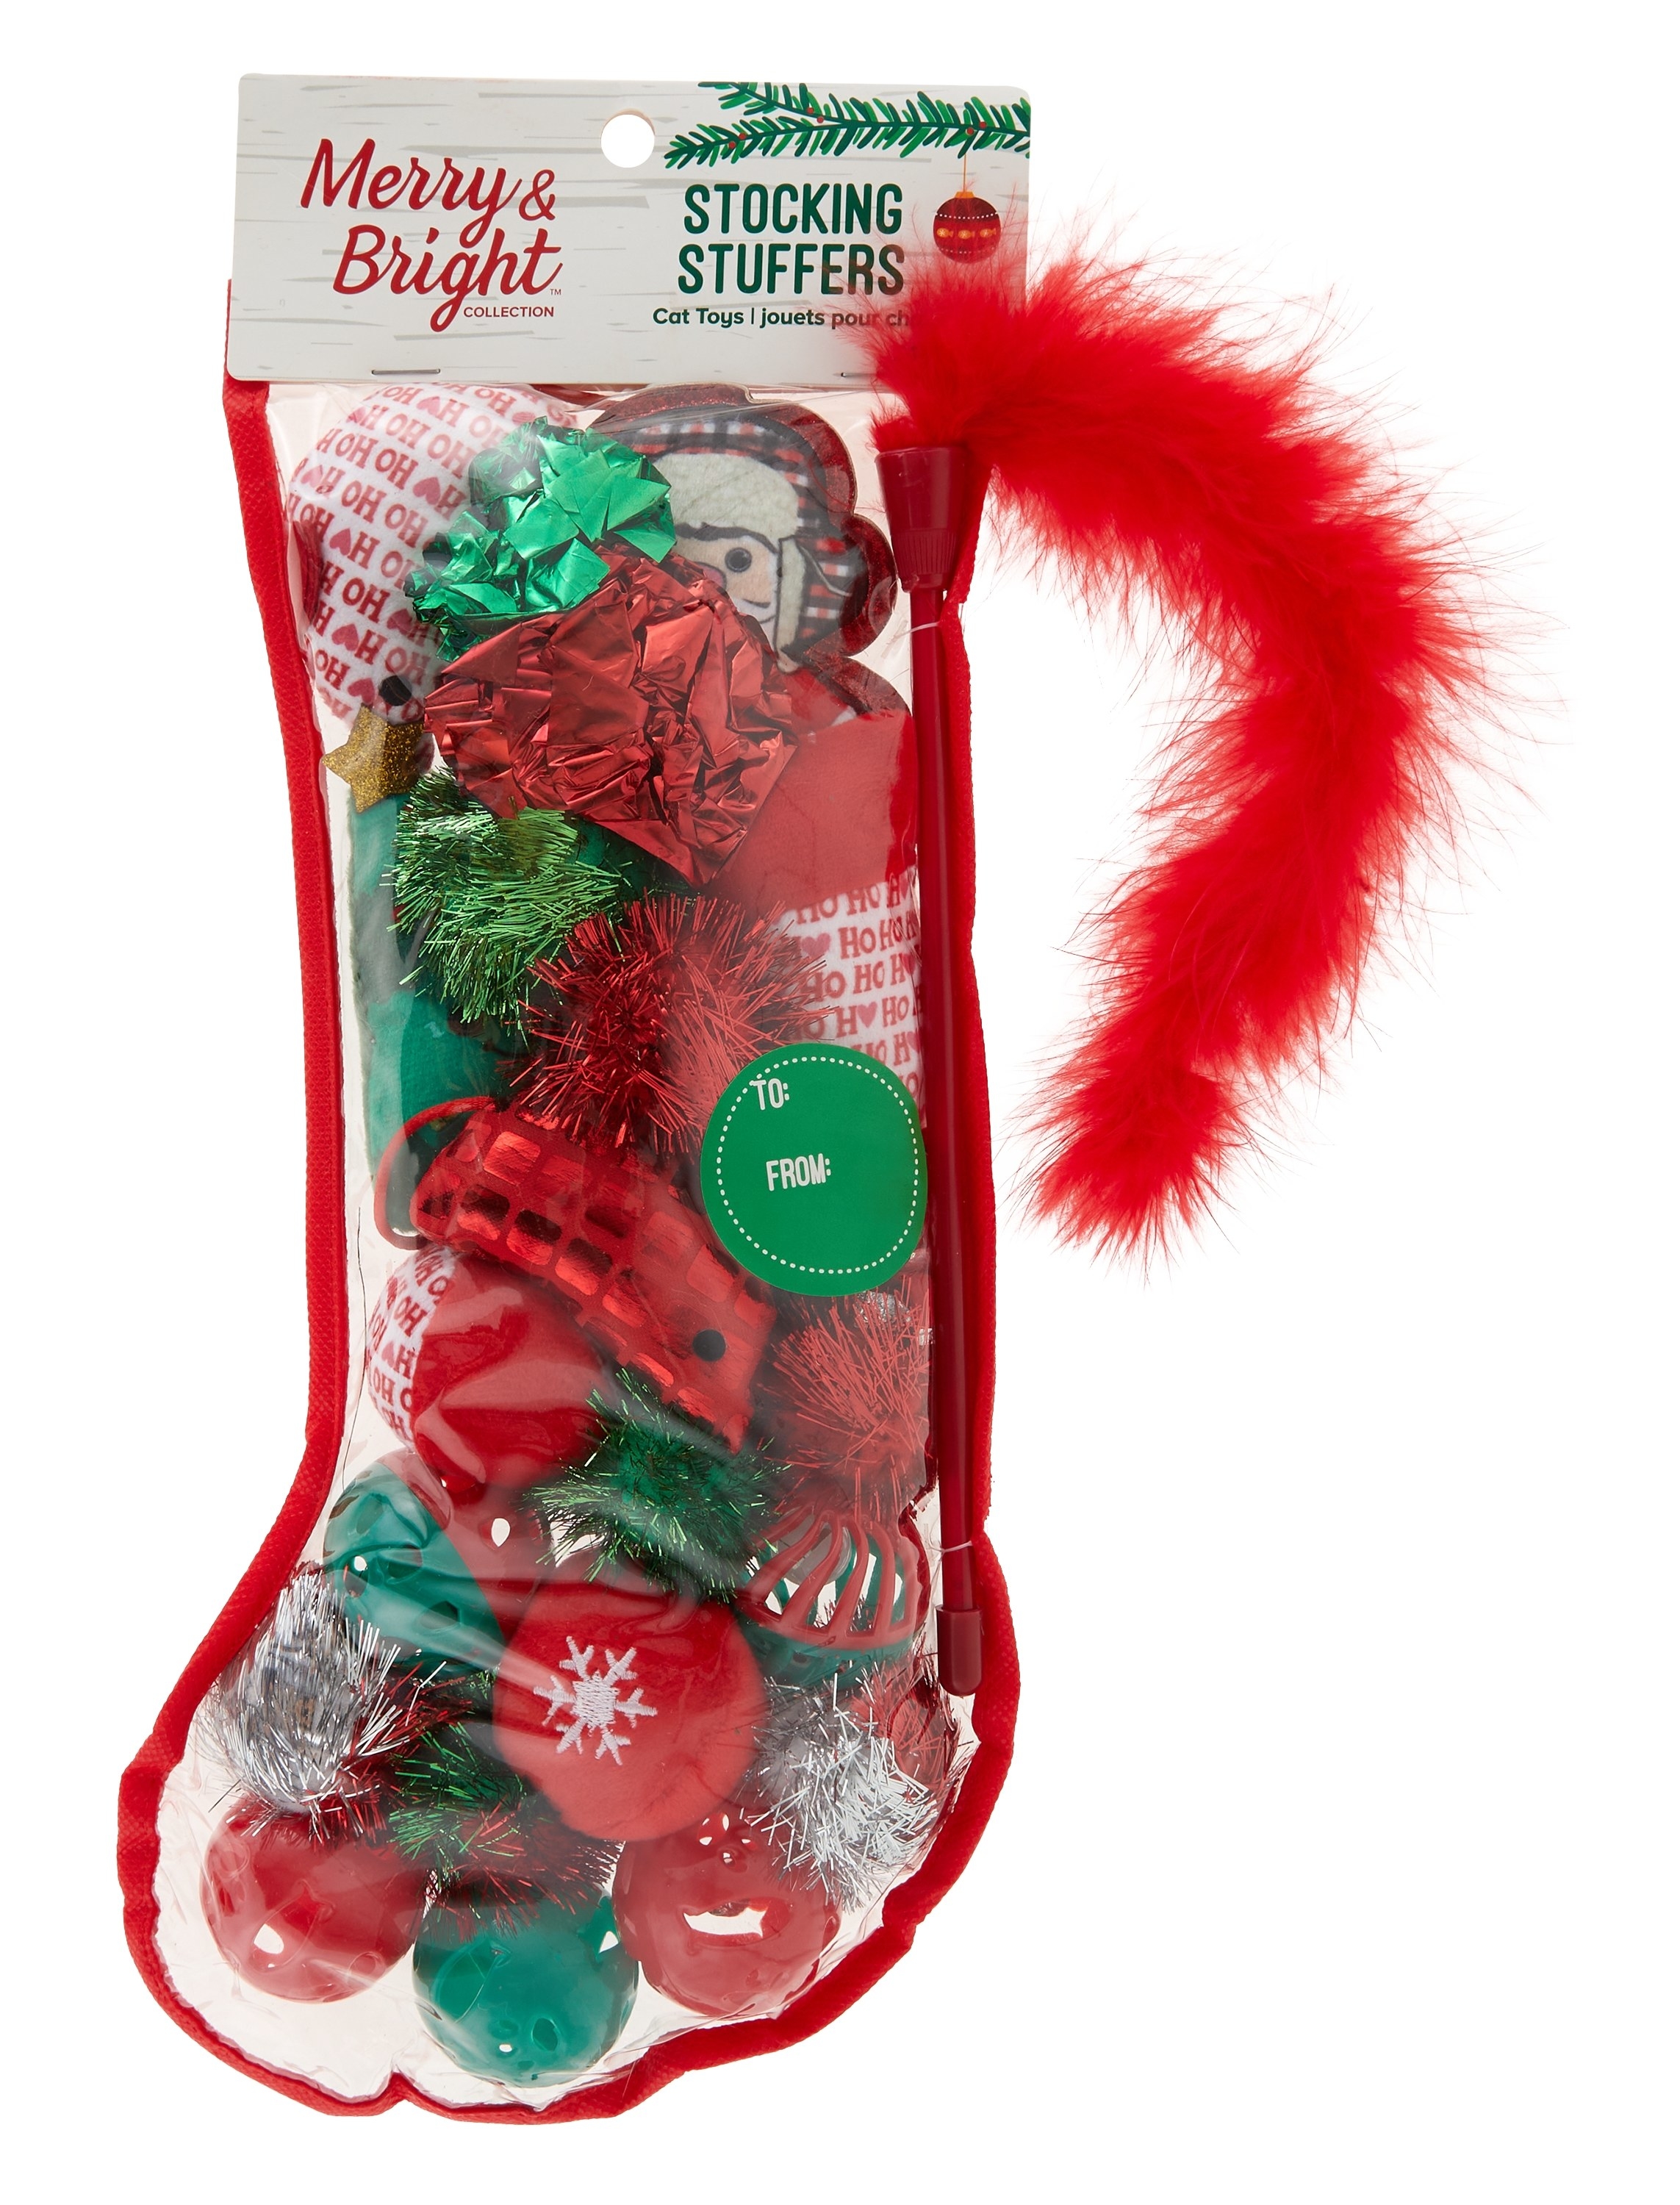 A bunch of cat toys in a plastic Christmas stocking